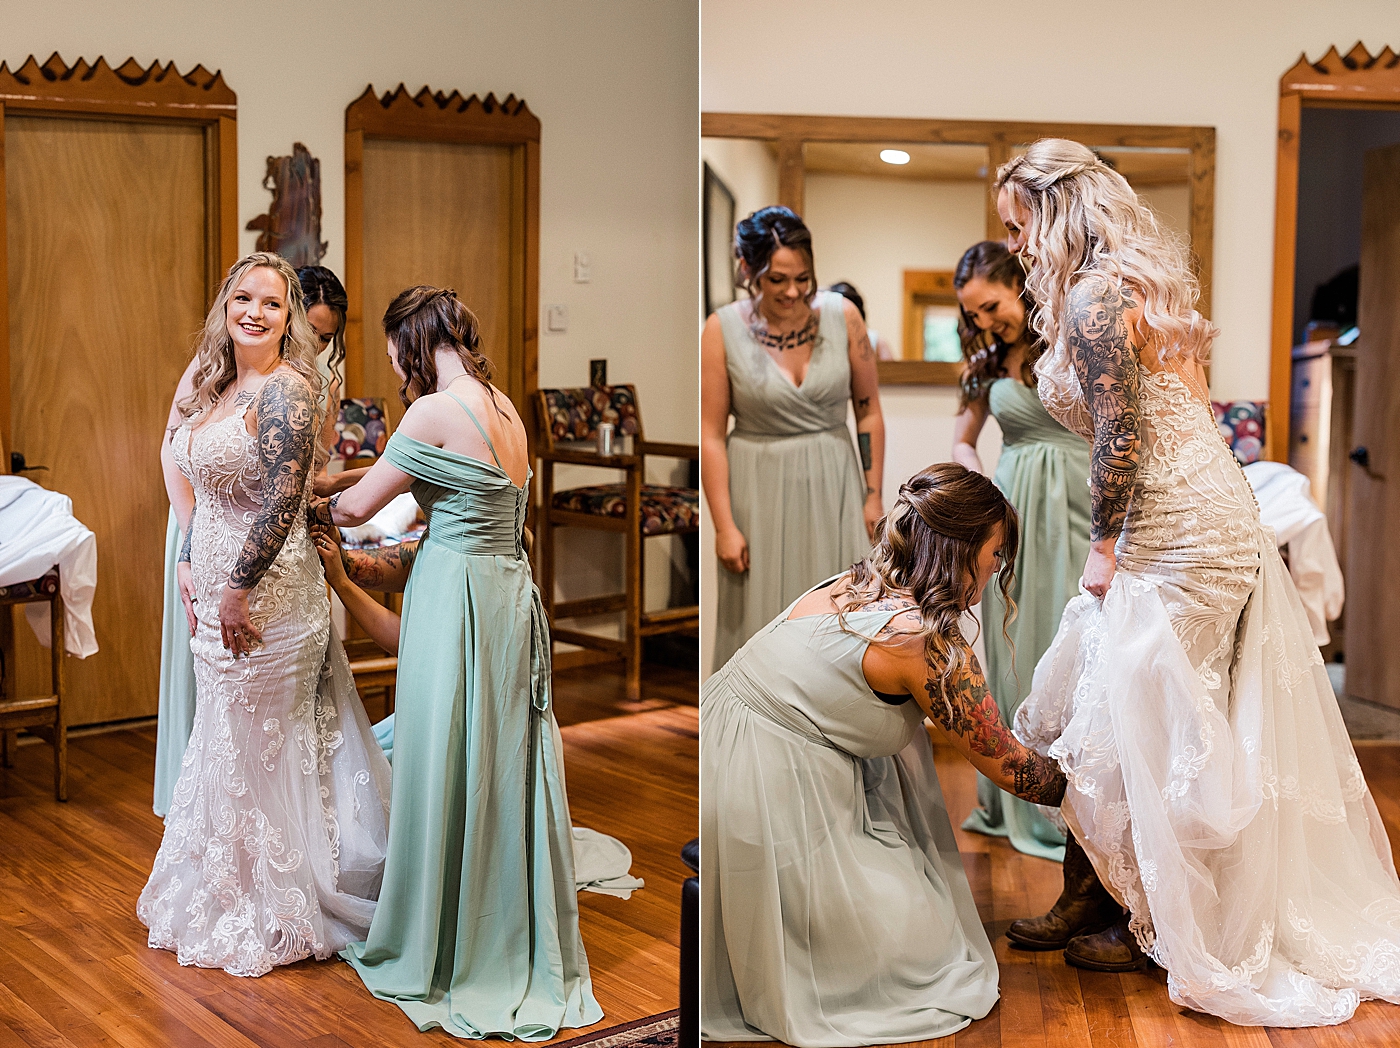 Bride getting in wedding dress for elopement at Mt Rainier. Photo by Megan Montalvo Photography.